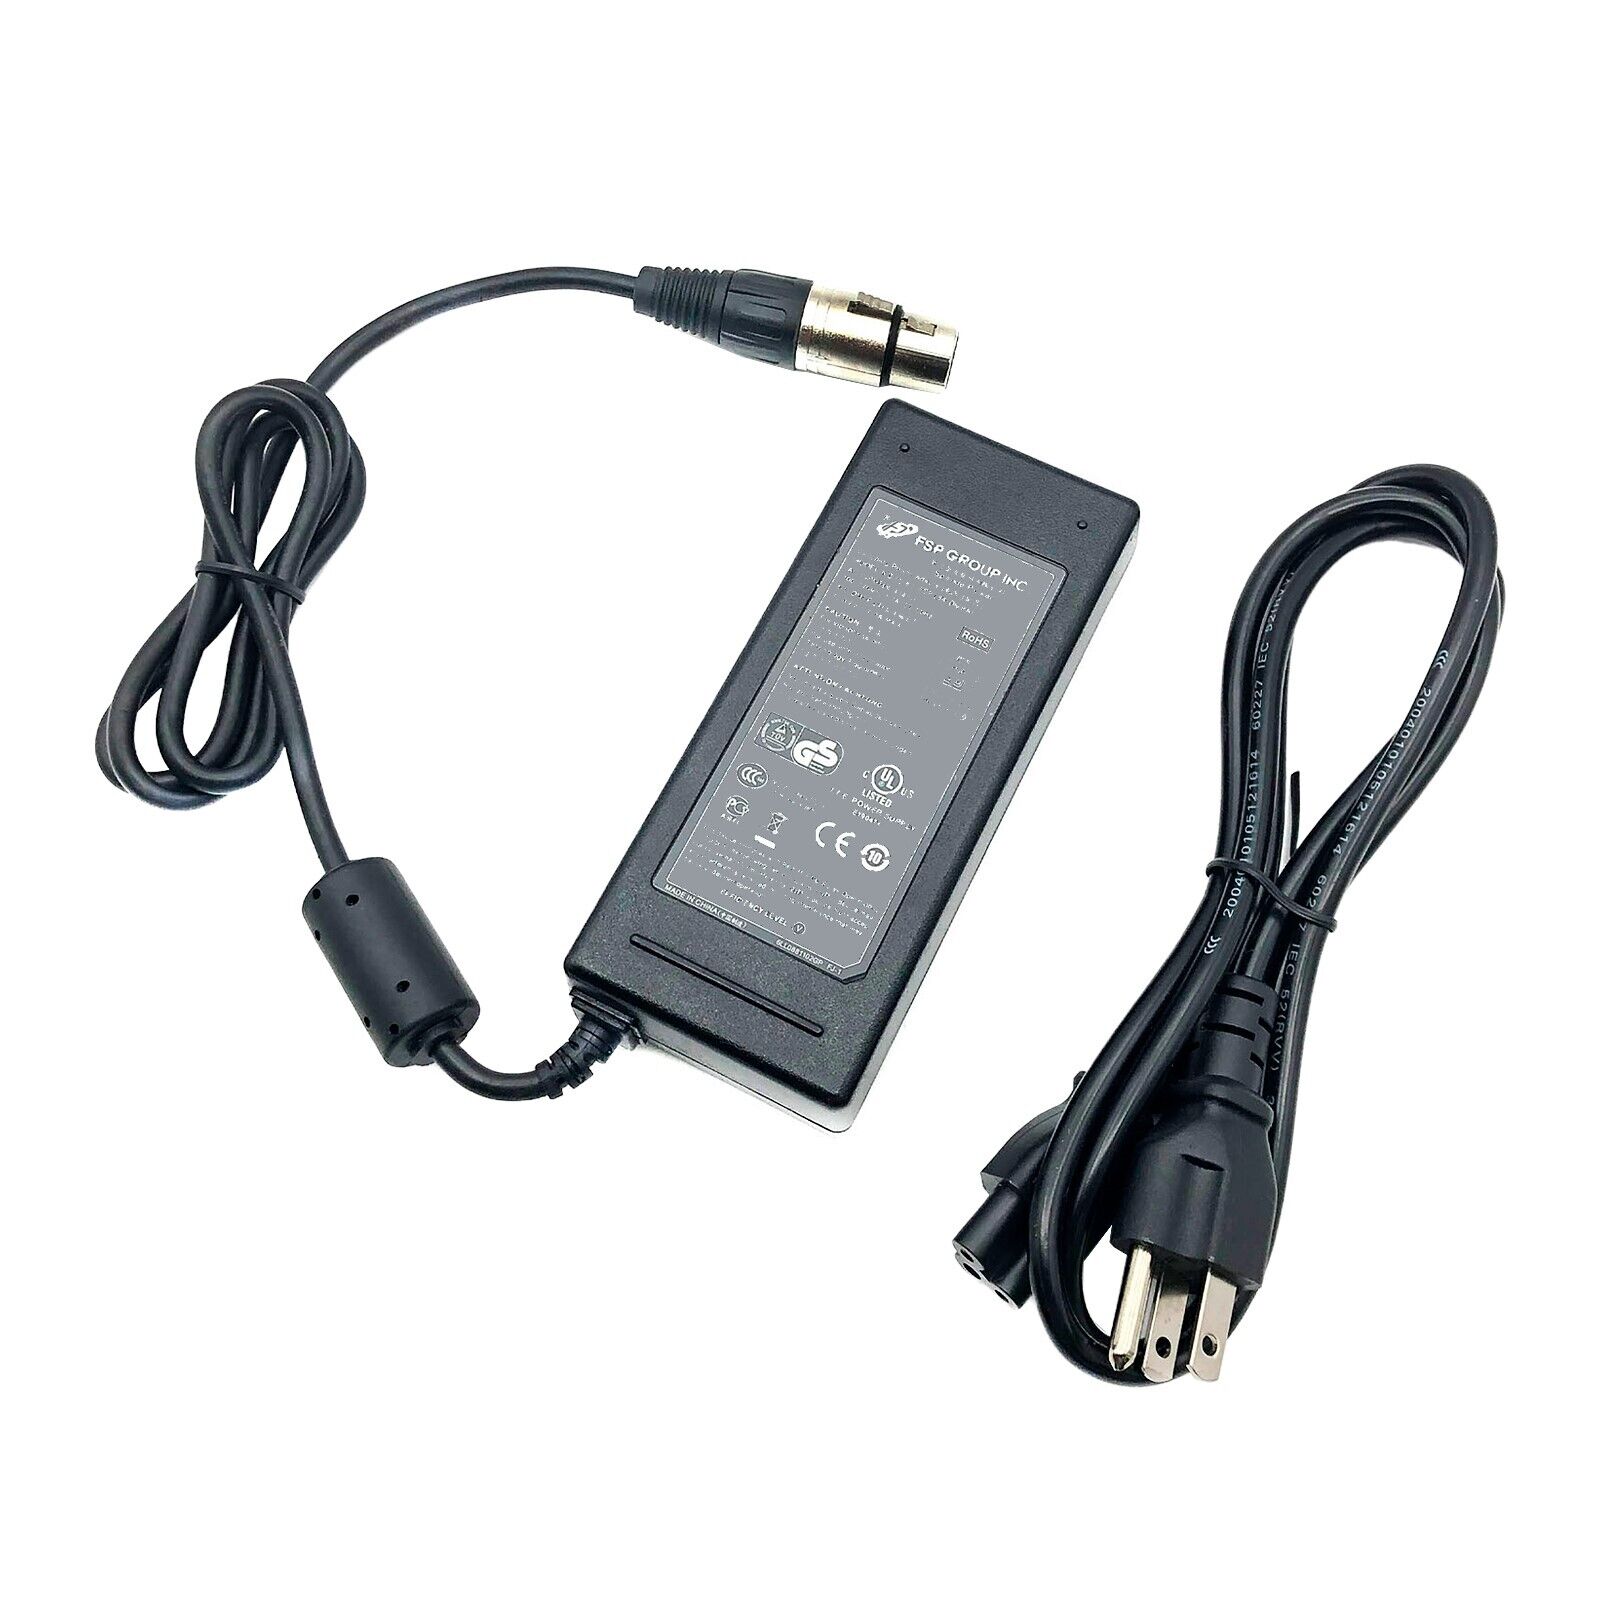 FSP AC Power Supply Adapter 12V 5A for JVC AA-P250U with 4-Pin XLR Plug w/ Cord Compatible Brand: Universal Maximum O